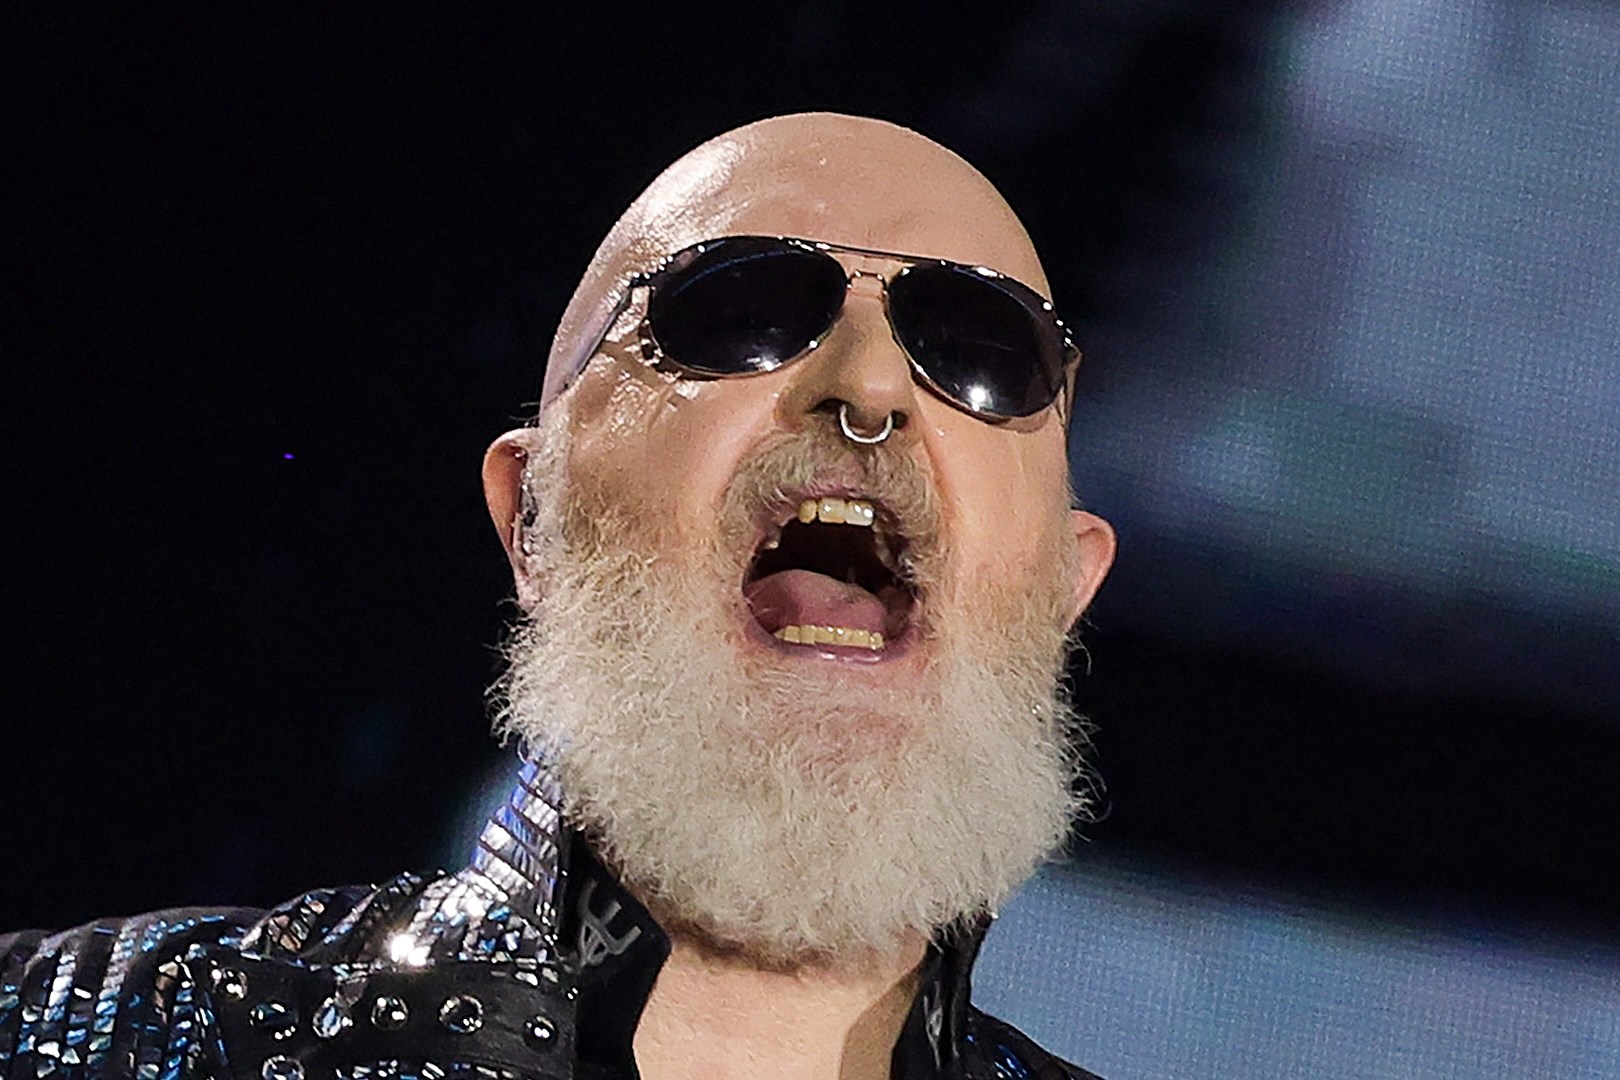 Rob Halford – Everything About Judas Priest Is Immersed in
‘Invincible Shield’ Album Title